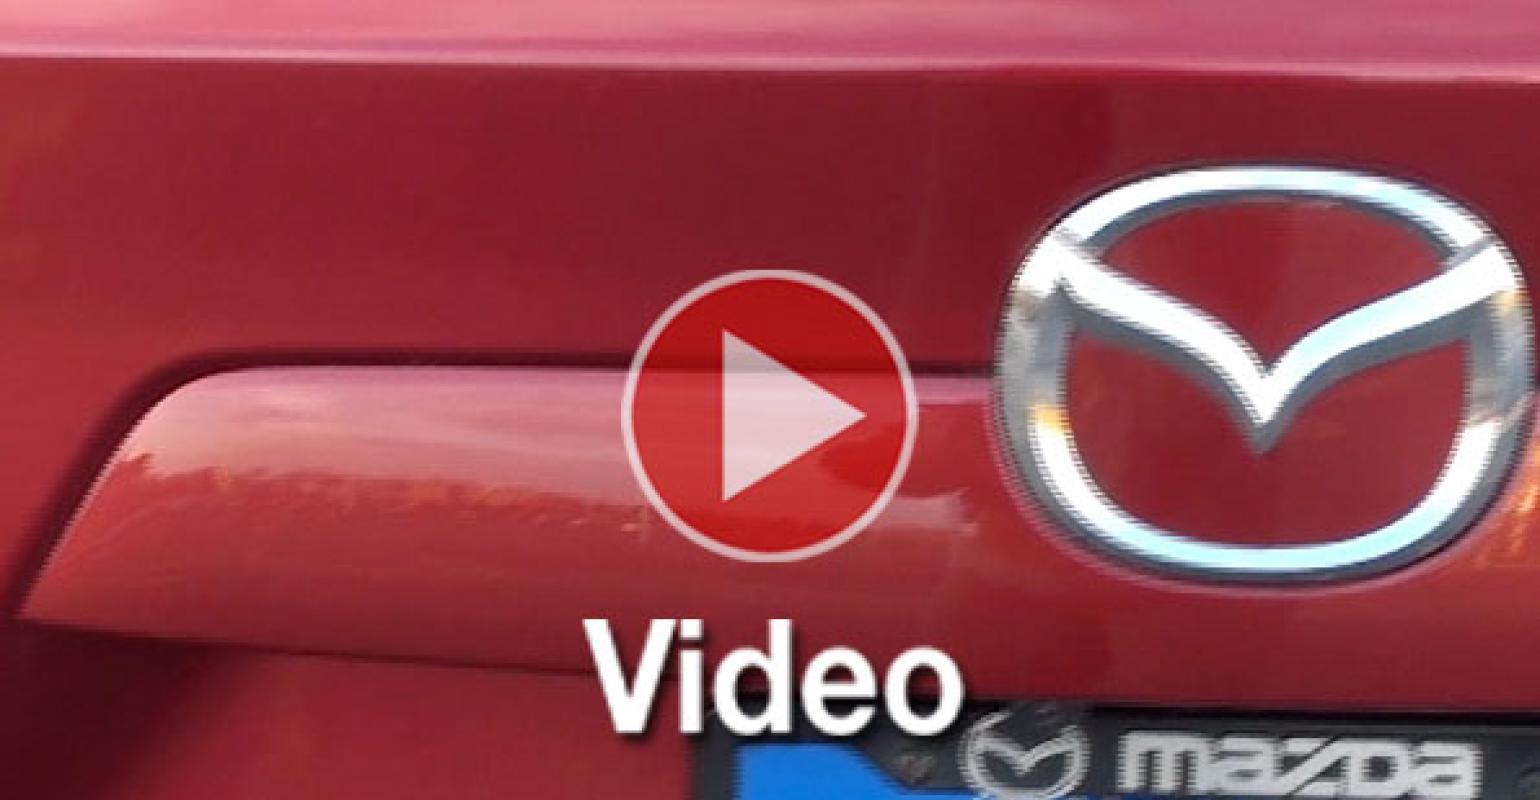 Mazda CX-5 Test Drive for Ward&#039;s 10 Best Engines of 2013